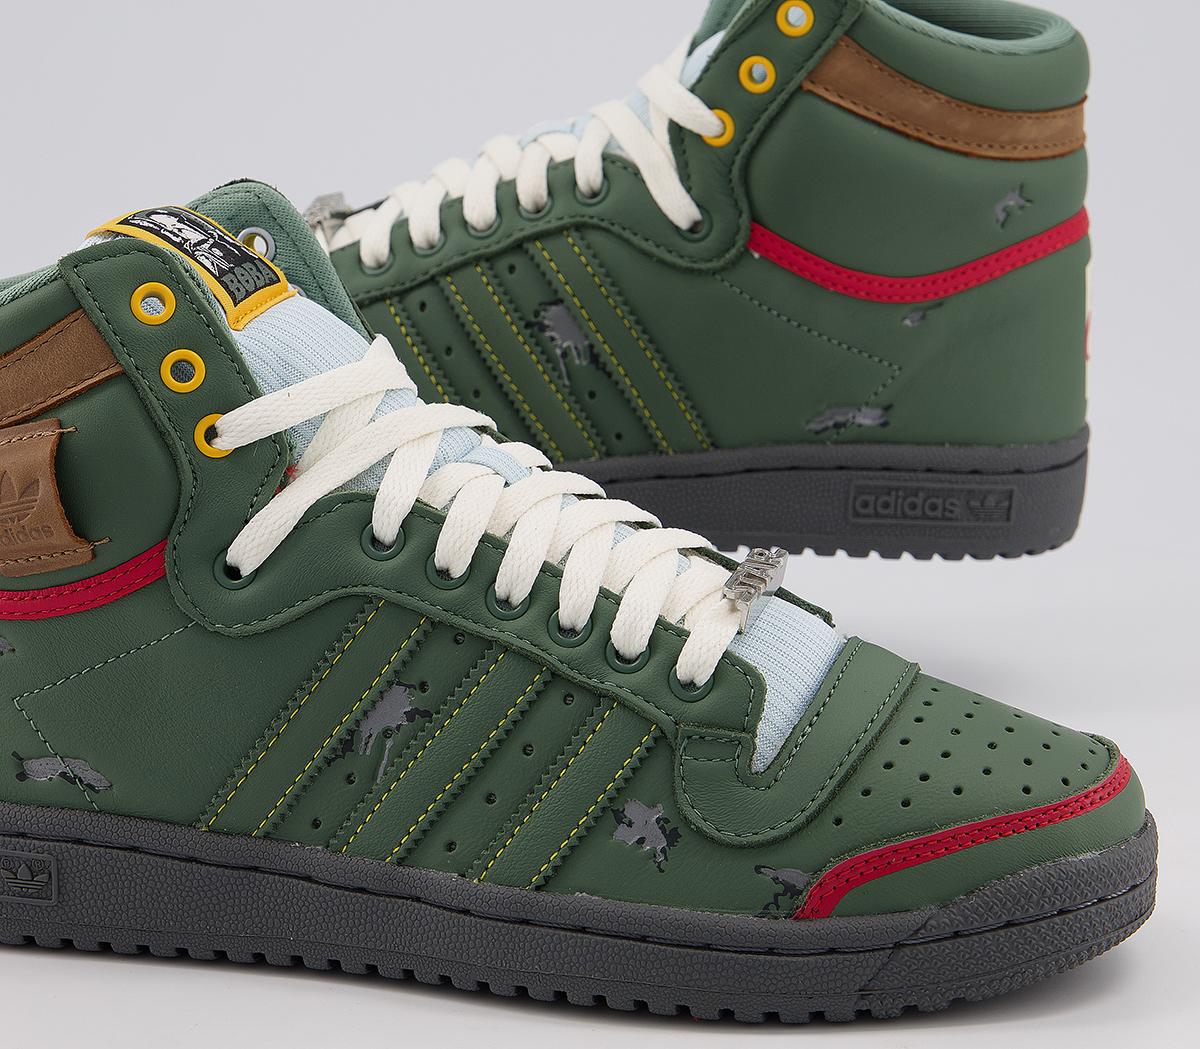 adidas Top Ten Hi Trainers Star Wars Trace Green Scarlet - His trainers